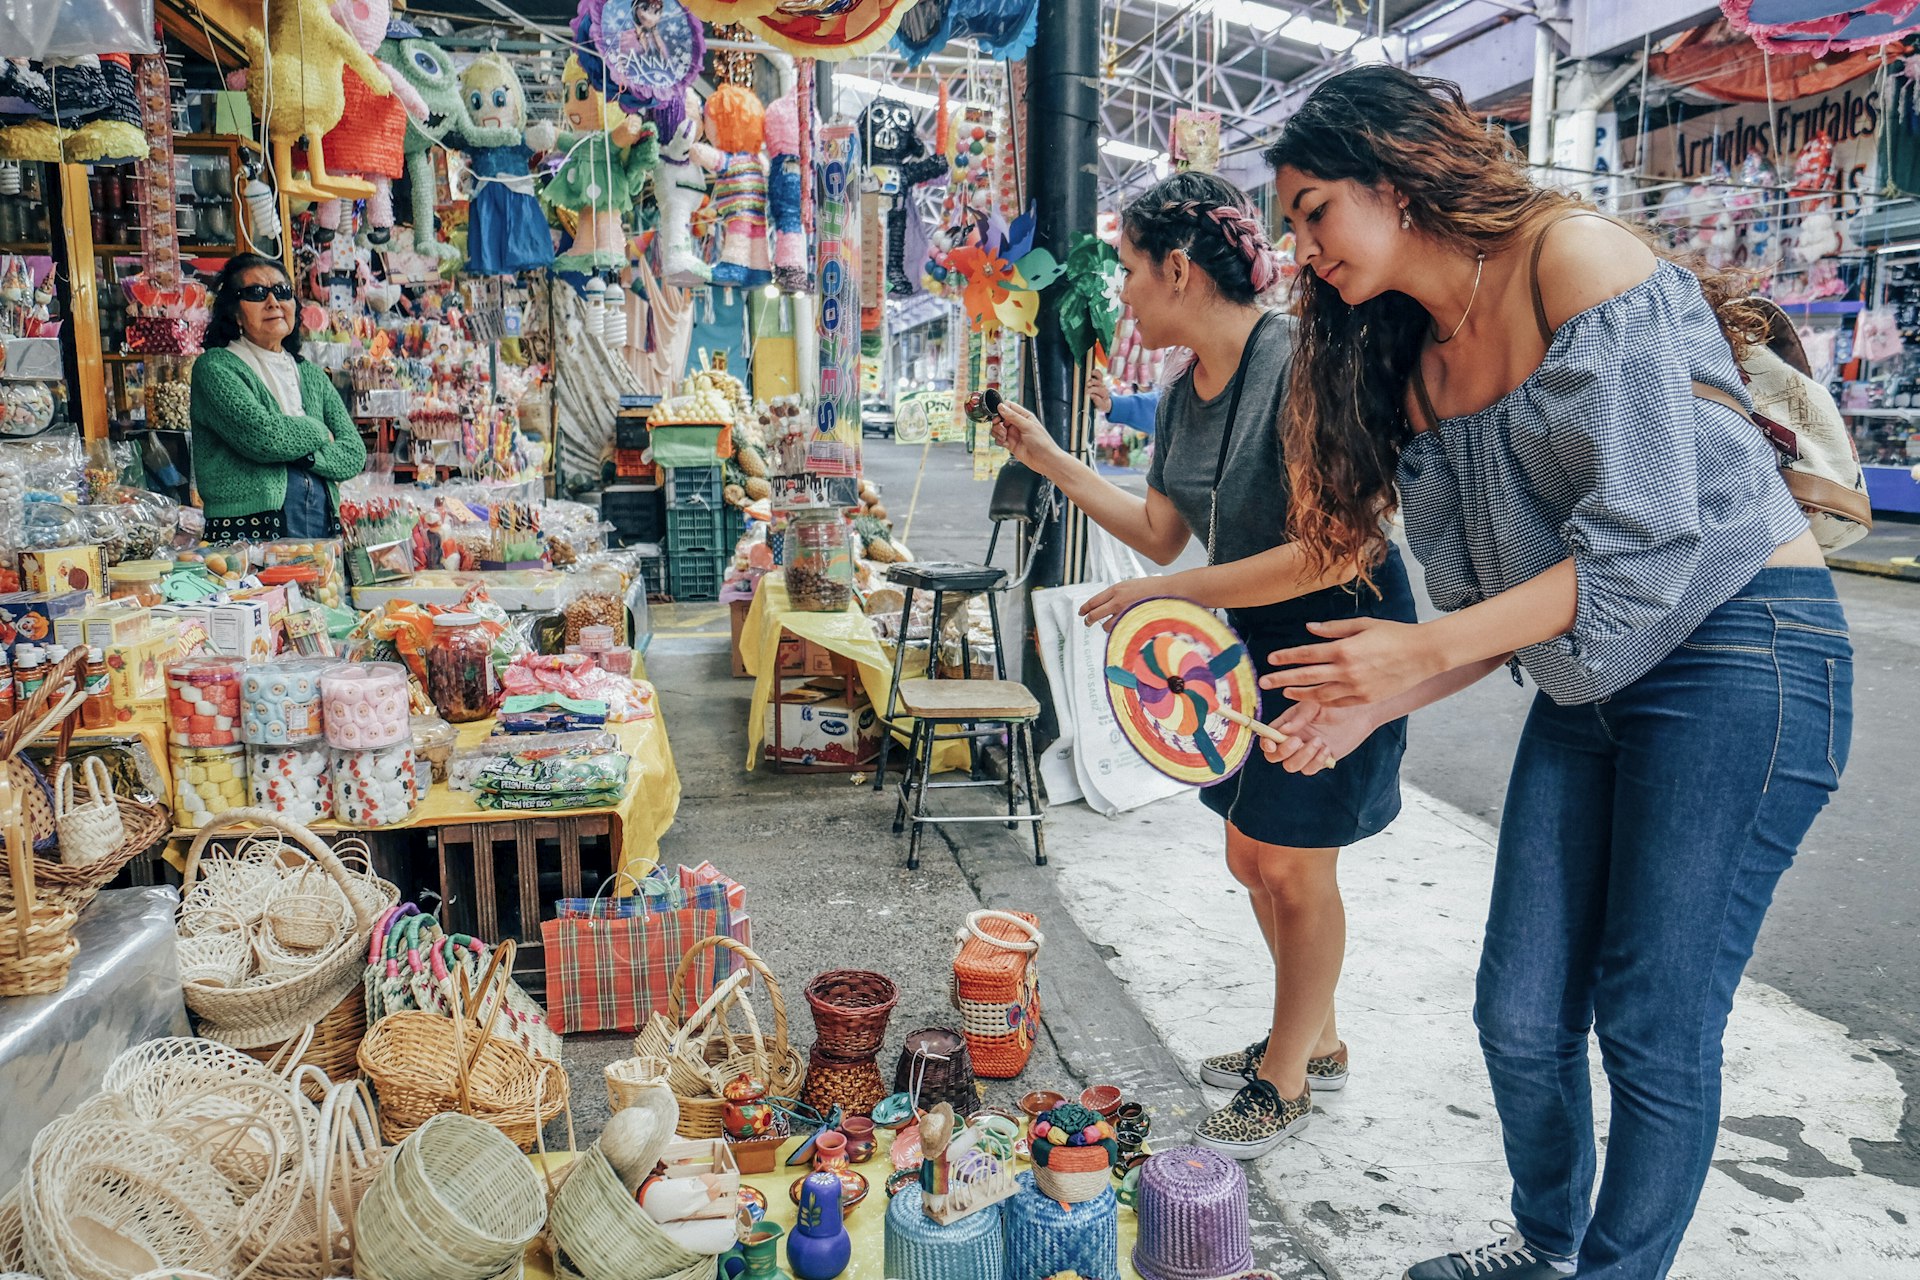 Two travelers shopping together in Mexico City market